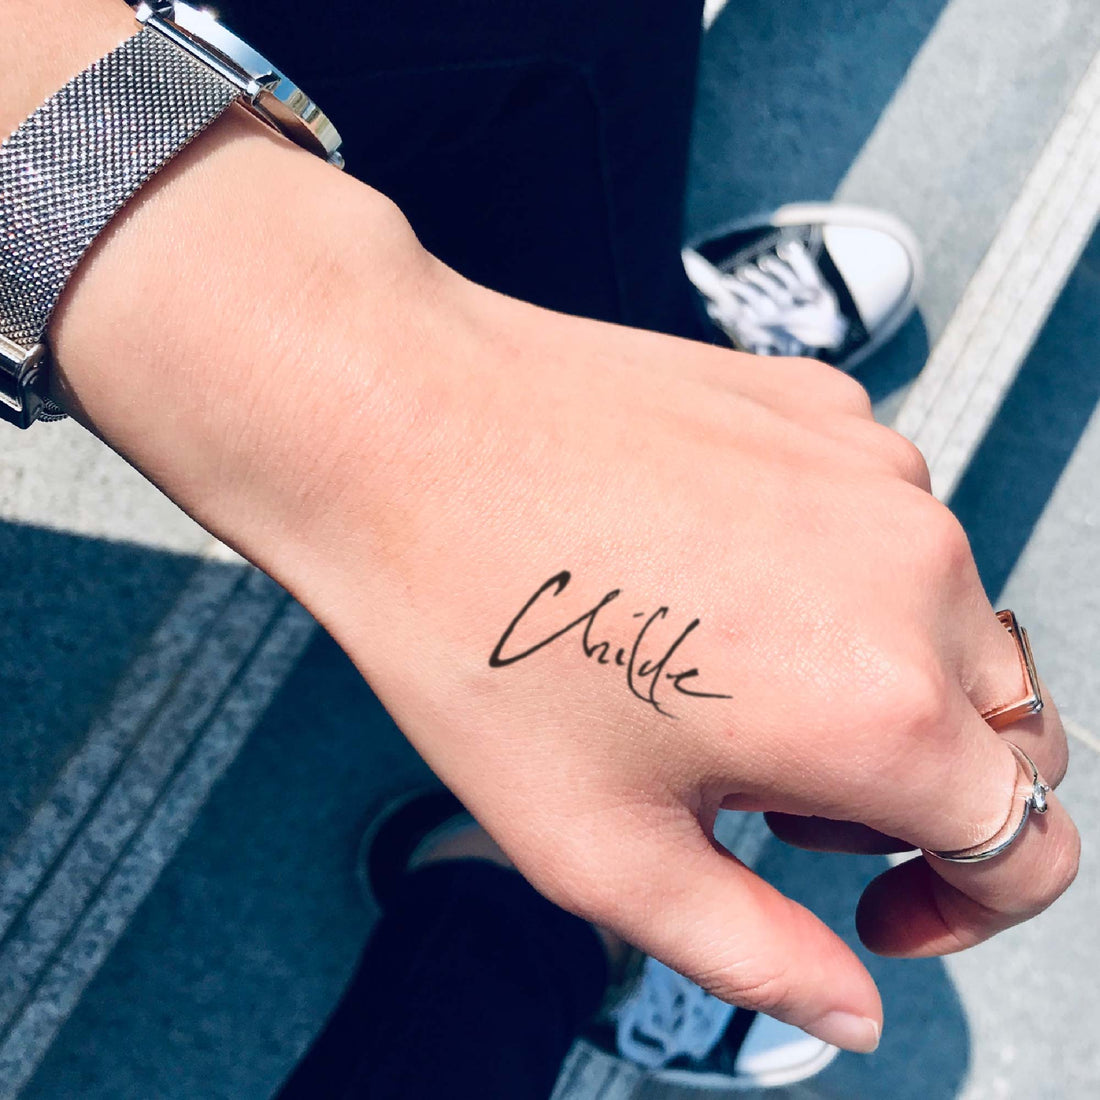 Childe custom temporary tattoo sticker design idea inspiration meanings removal arm wrist hand words font name signature calligraphy lyrics tour concert outfits merch accessory gift souvenir costumes wear dress up code